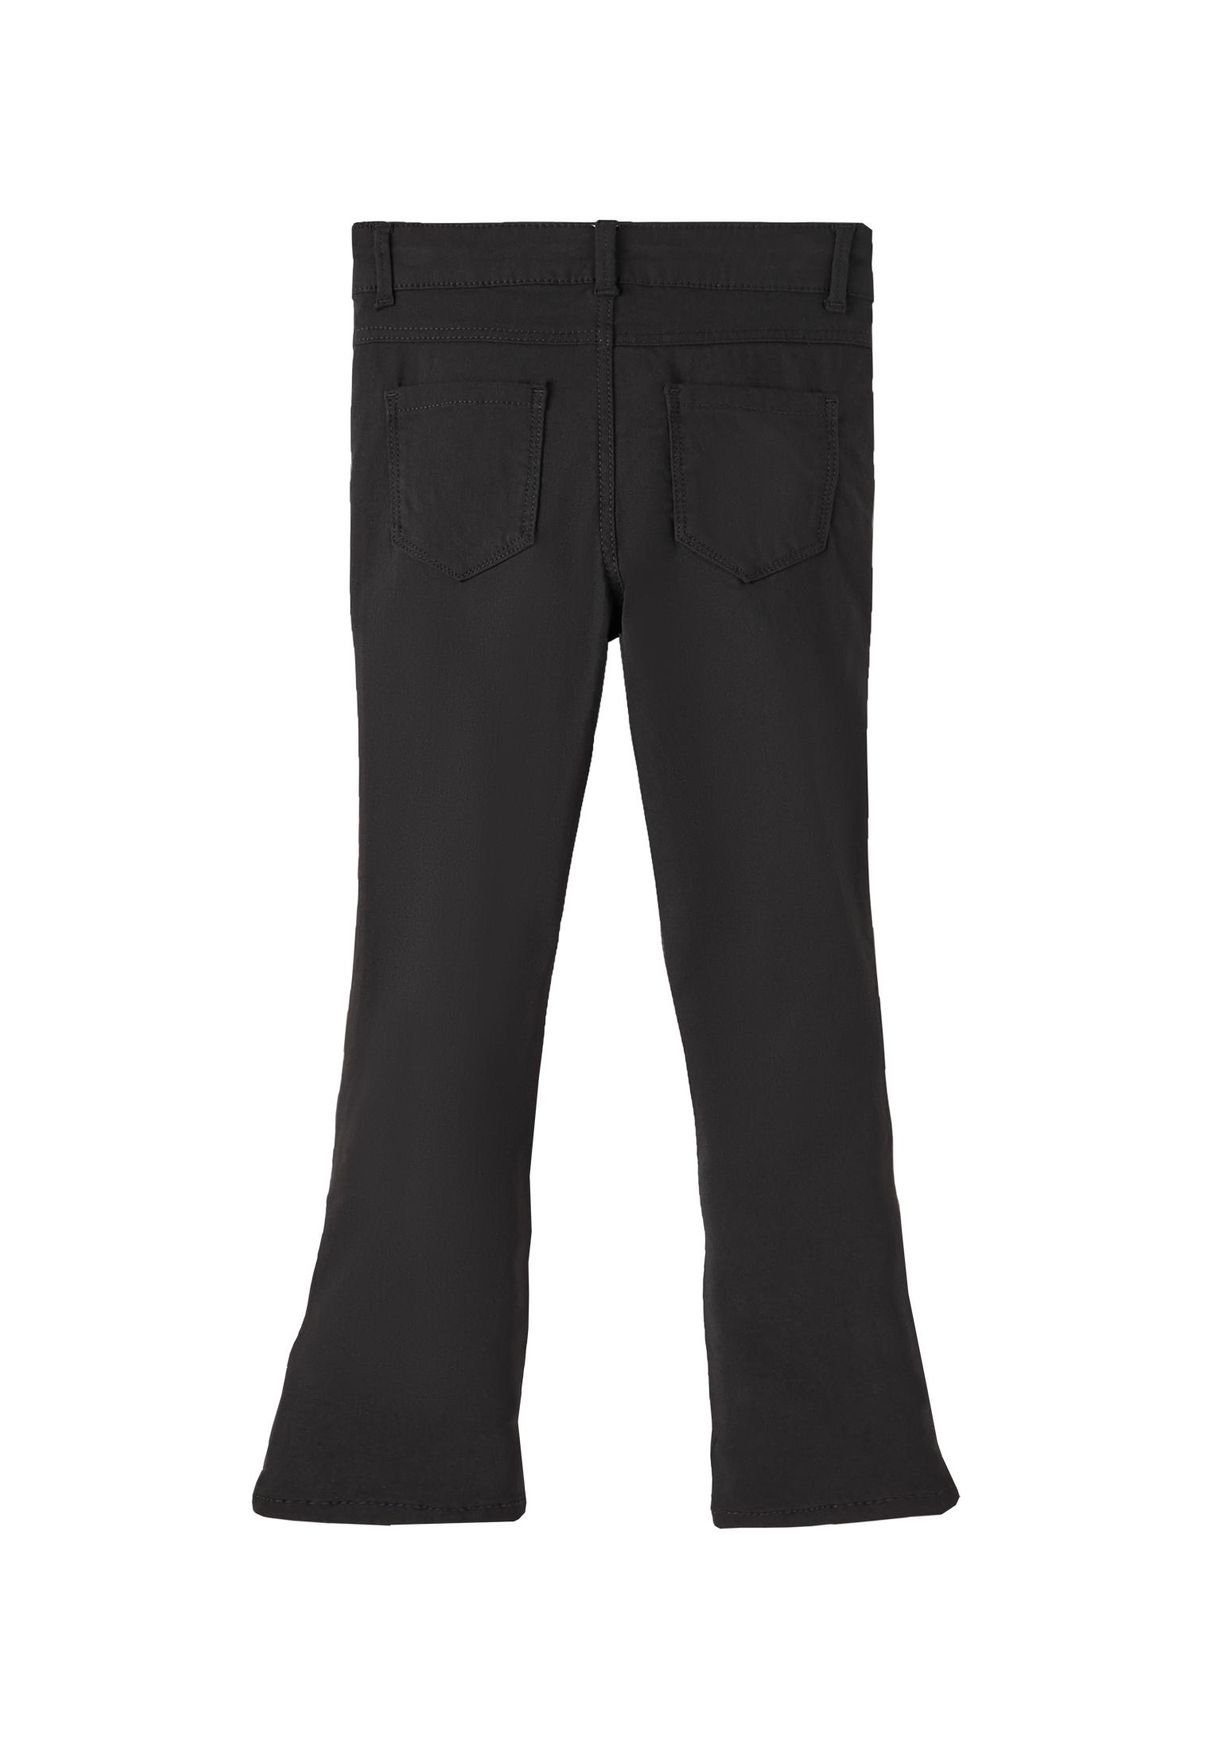 in Name Leg Mid 5106 Waist Schlaghose Stretch Schwarz Wide NKFPOLLY Bootcut It Hose Stoffhose